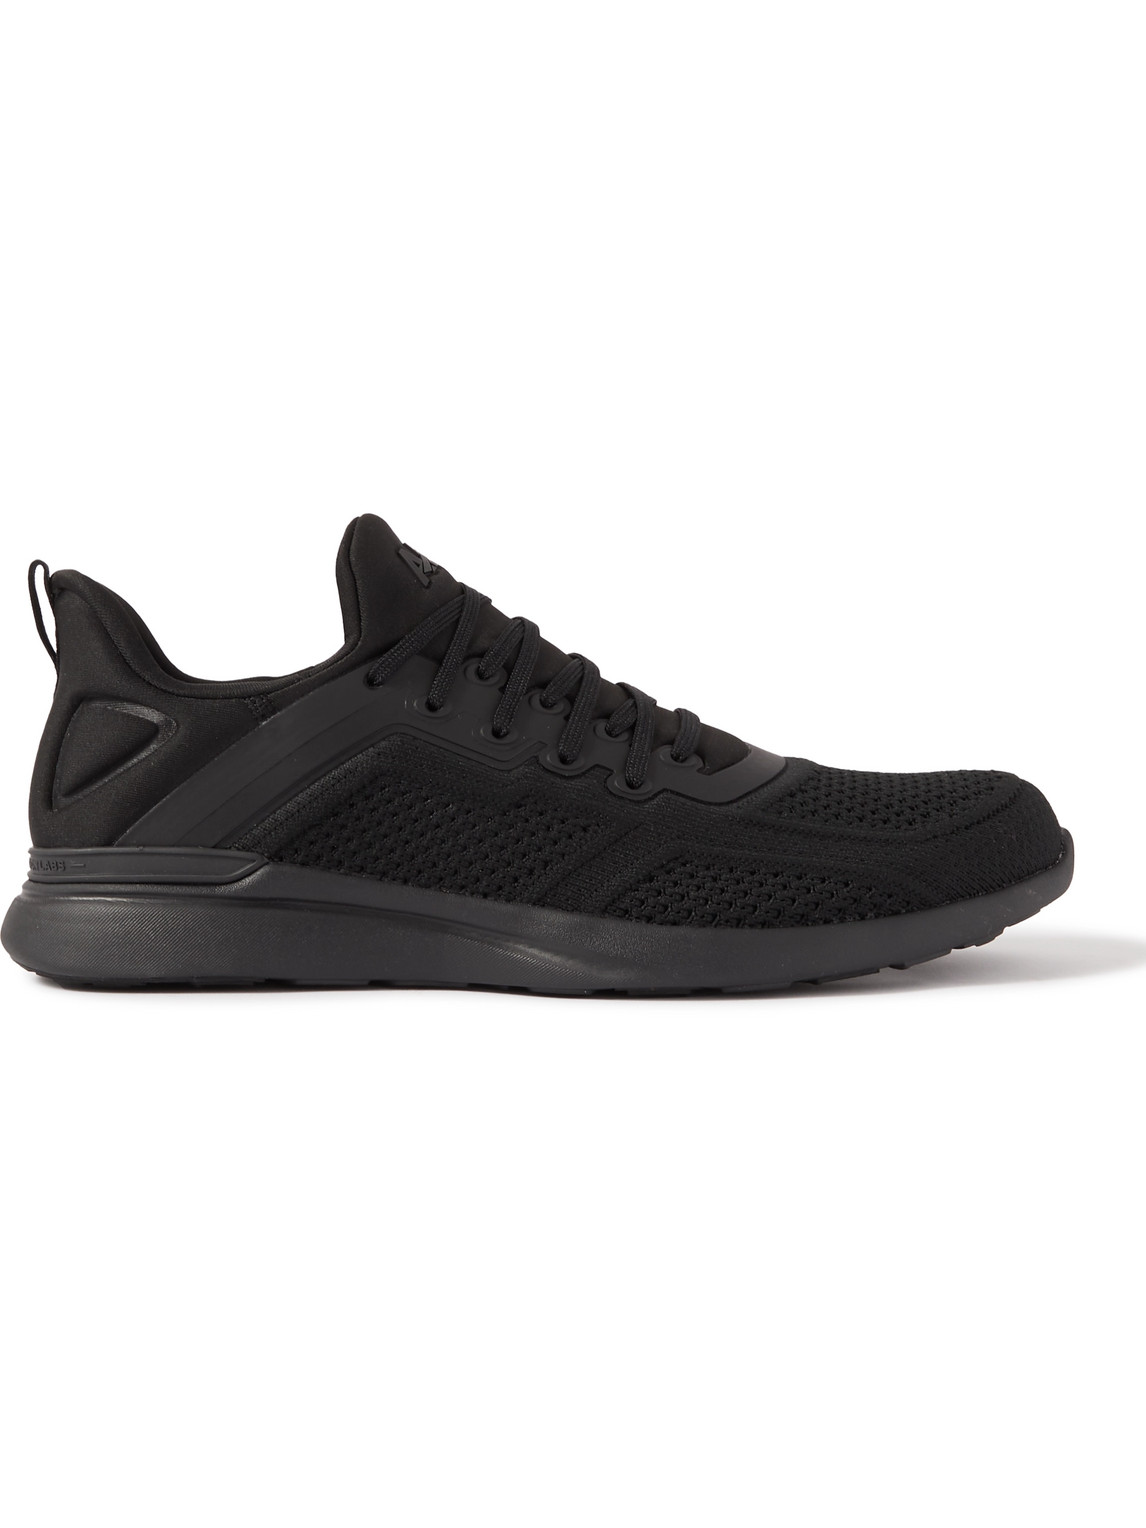 Apl Athletic Propulsion Labs Techloom Tracer Running Sneakers In Black